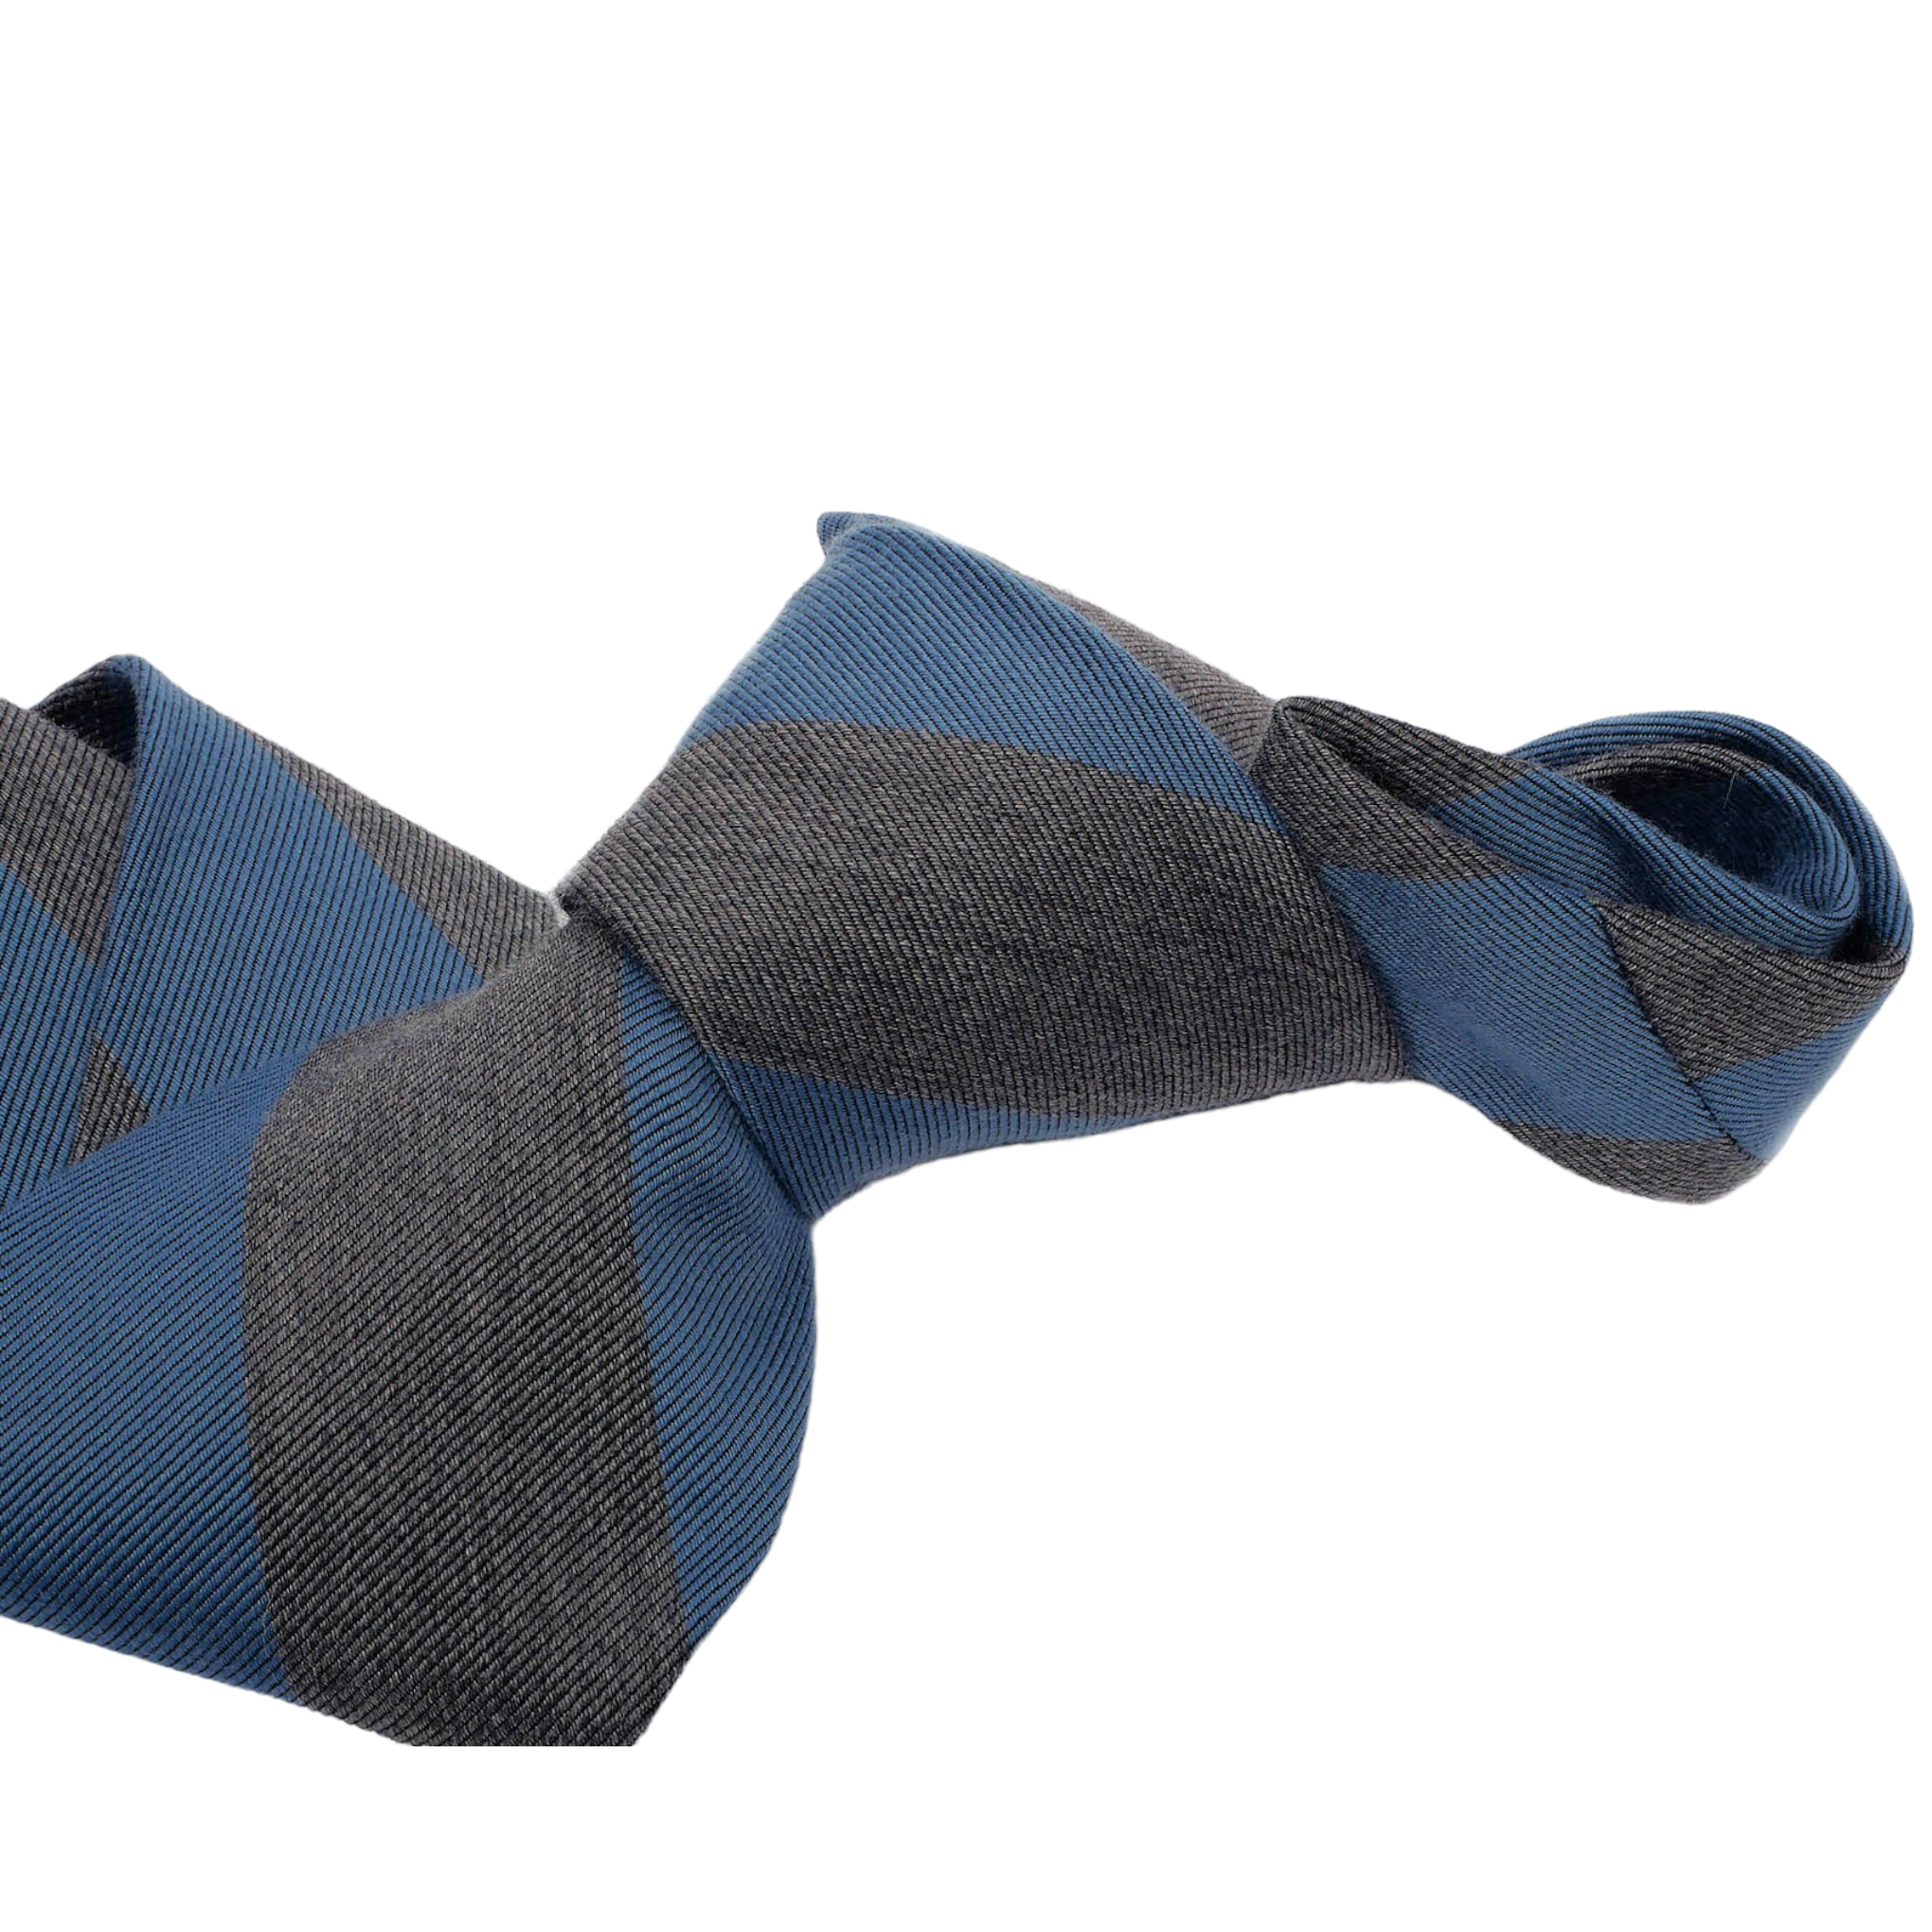 Regimental unlined Anversa tie silk and cashmere royal blu and grey